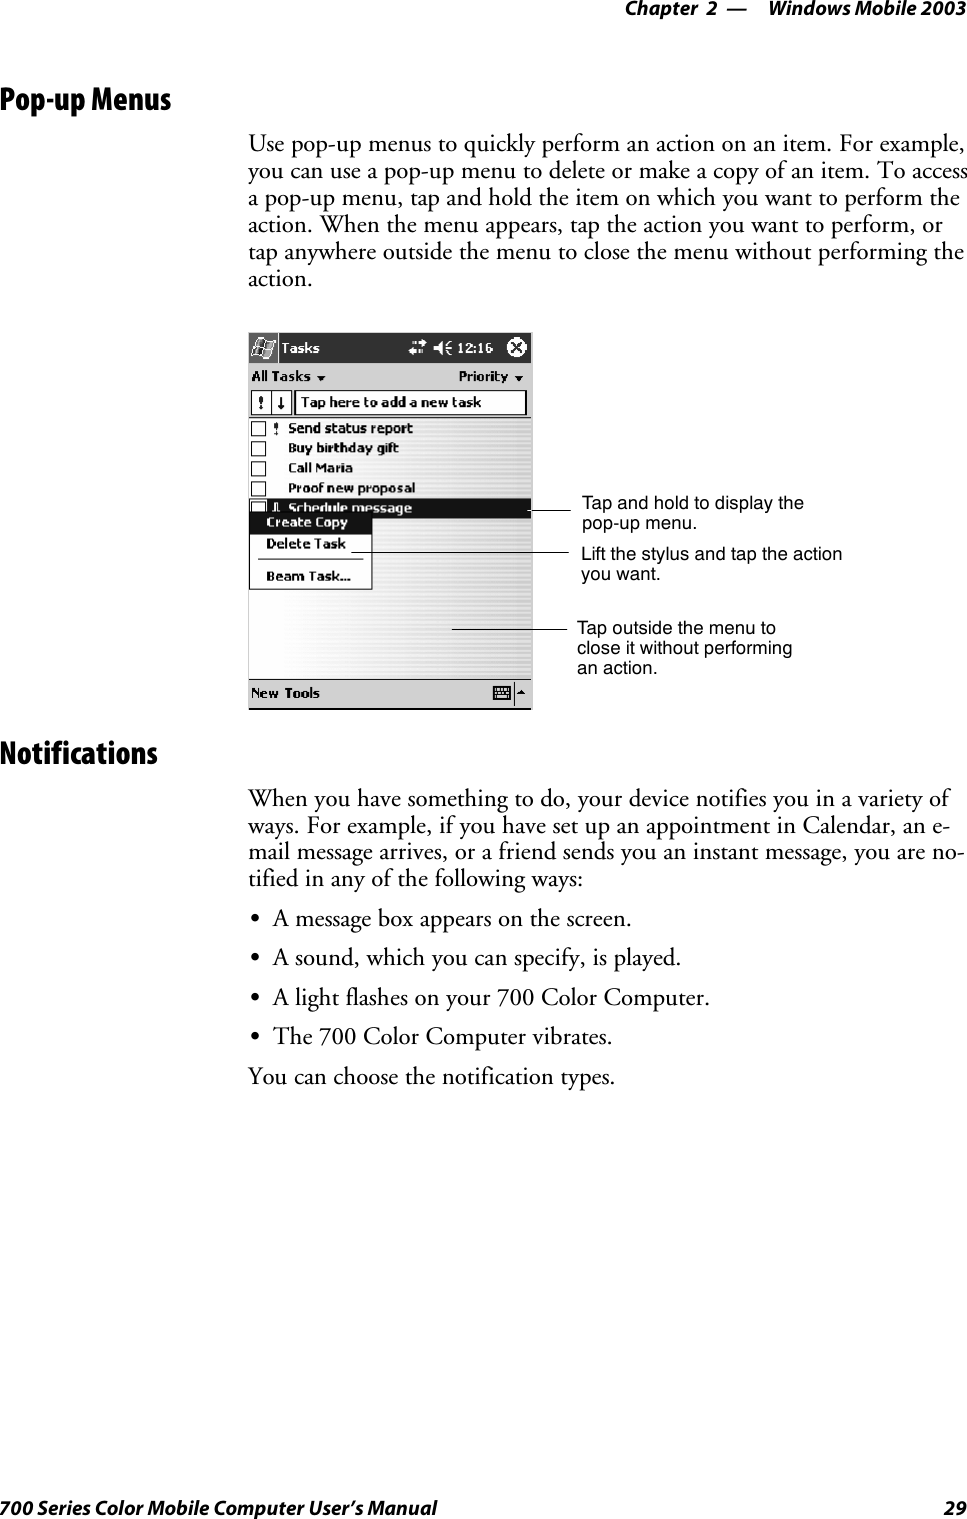 Windows Mobile 2003—Chapter 229700 Series Color Mobile Computer User’s ManualPop-up MenusUse pop-up menus to quickly perform an action on an item. For example,you can use a pop-up menu to delete or make a copy of an item. To accessa pop-up menu, tap and hold the item on which you want to perform theaction. When the menu appears, tap the action you want to perform, ortap anywhere outside the menu to close the menu without performing theaction.Tap and hold to display thepop-up menu.Lift the stylus and tap the actionyou want.Tap outside the menu toclose it without performingan action.NotificationsWhen you have something to do, your device notifies you in a variety ofways. For example, if you have set up an appointment in Calendar, an e-mail message arrives, or a friend sends you an instant message, you are no-tified in any of the following ways:SA message box appears on the screen.SA sound, which you can specify, is played.SA light flashes on your 700 Color Computer.SThe700ColorComputervibrates.You can choose the notification types.